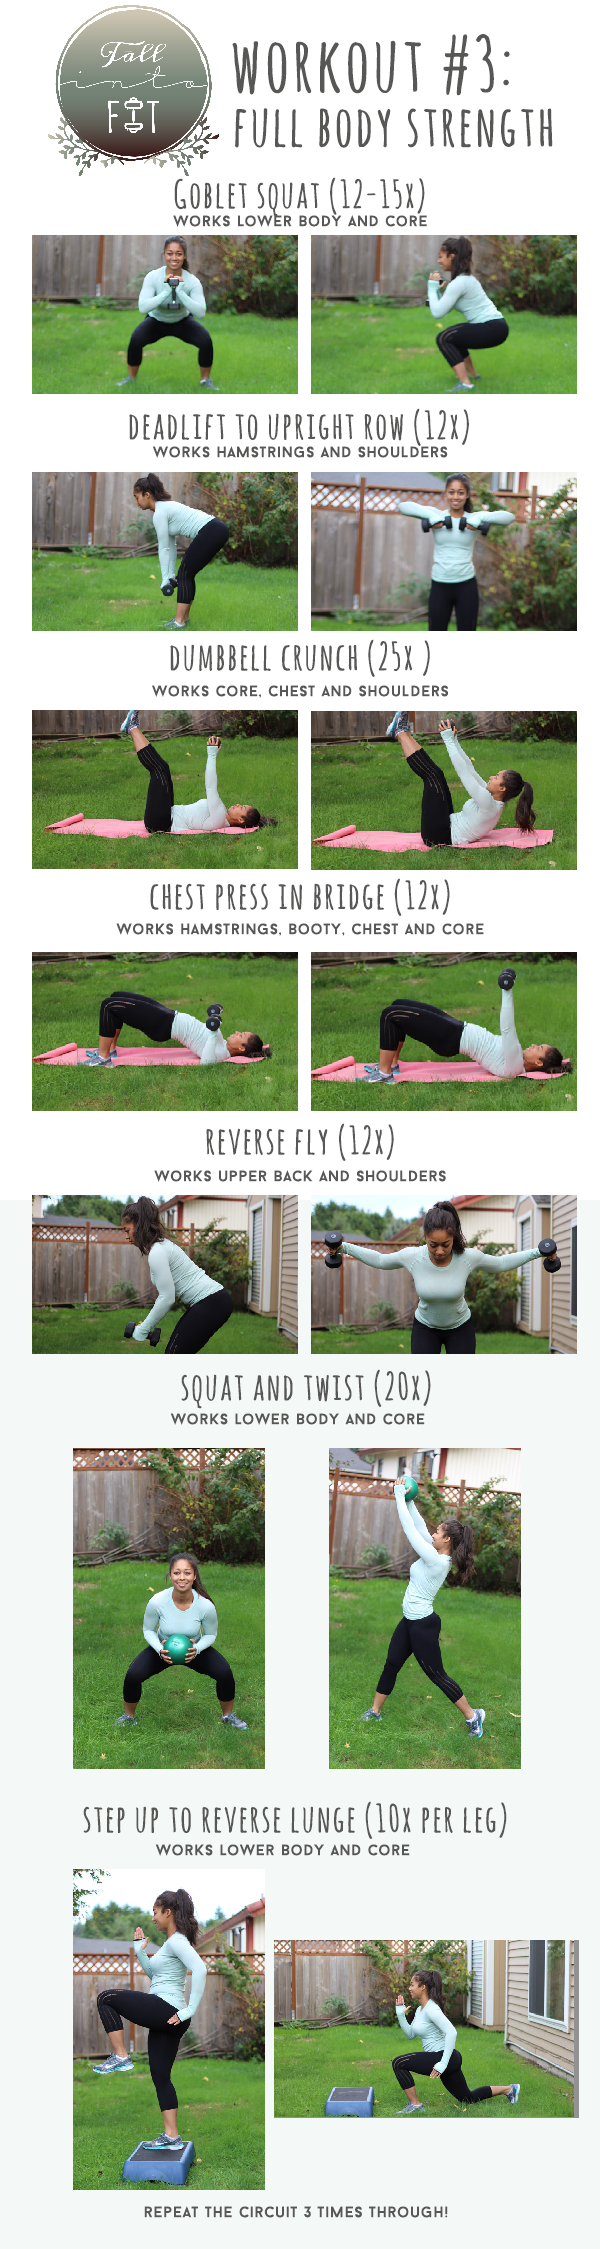 Fall Into Fit Week 3 Workout